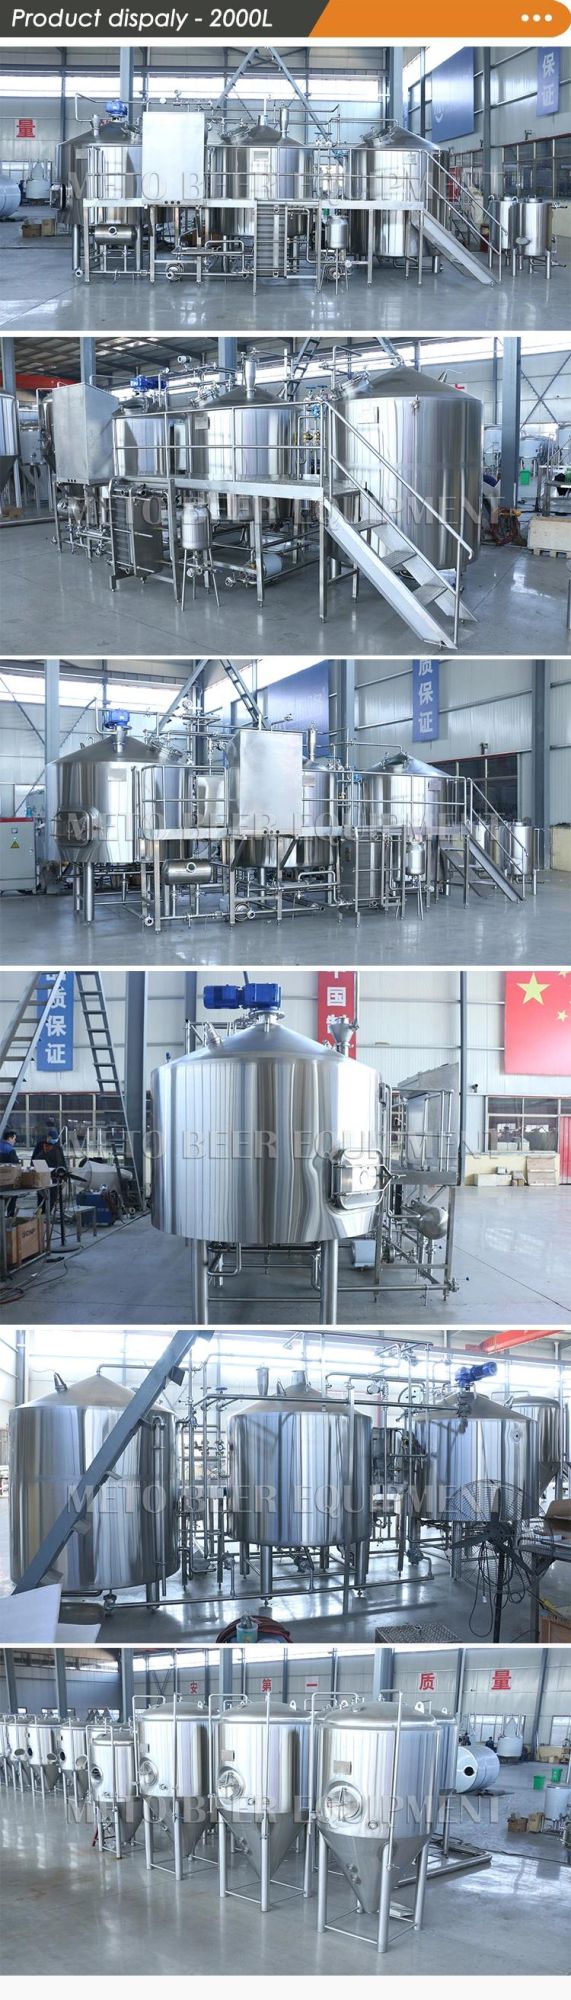 20bbl 2000L Stainless Steel Beer Brasserie Equipment for Sale